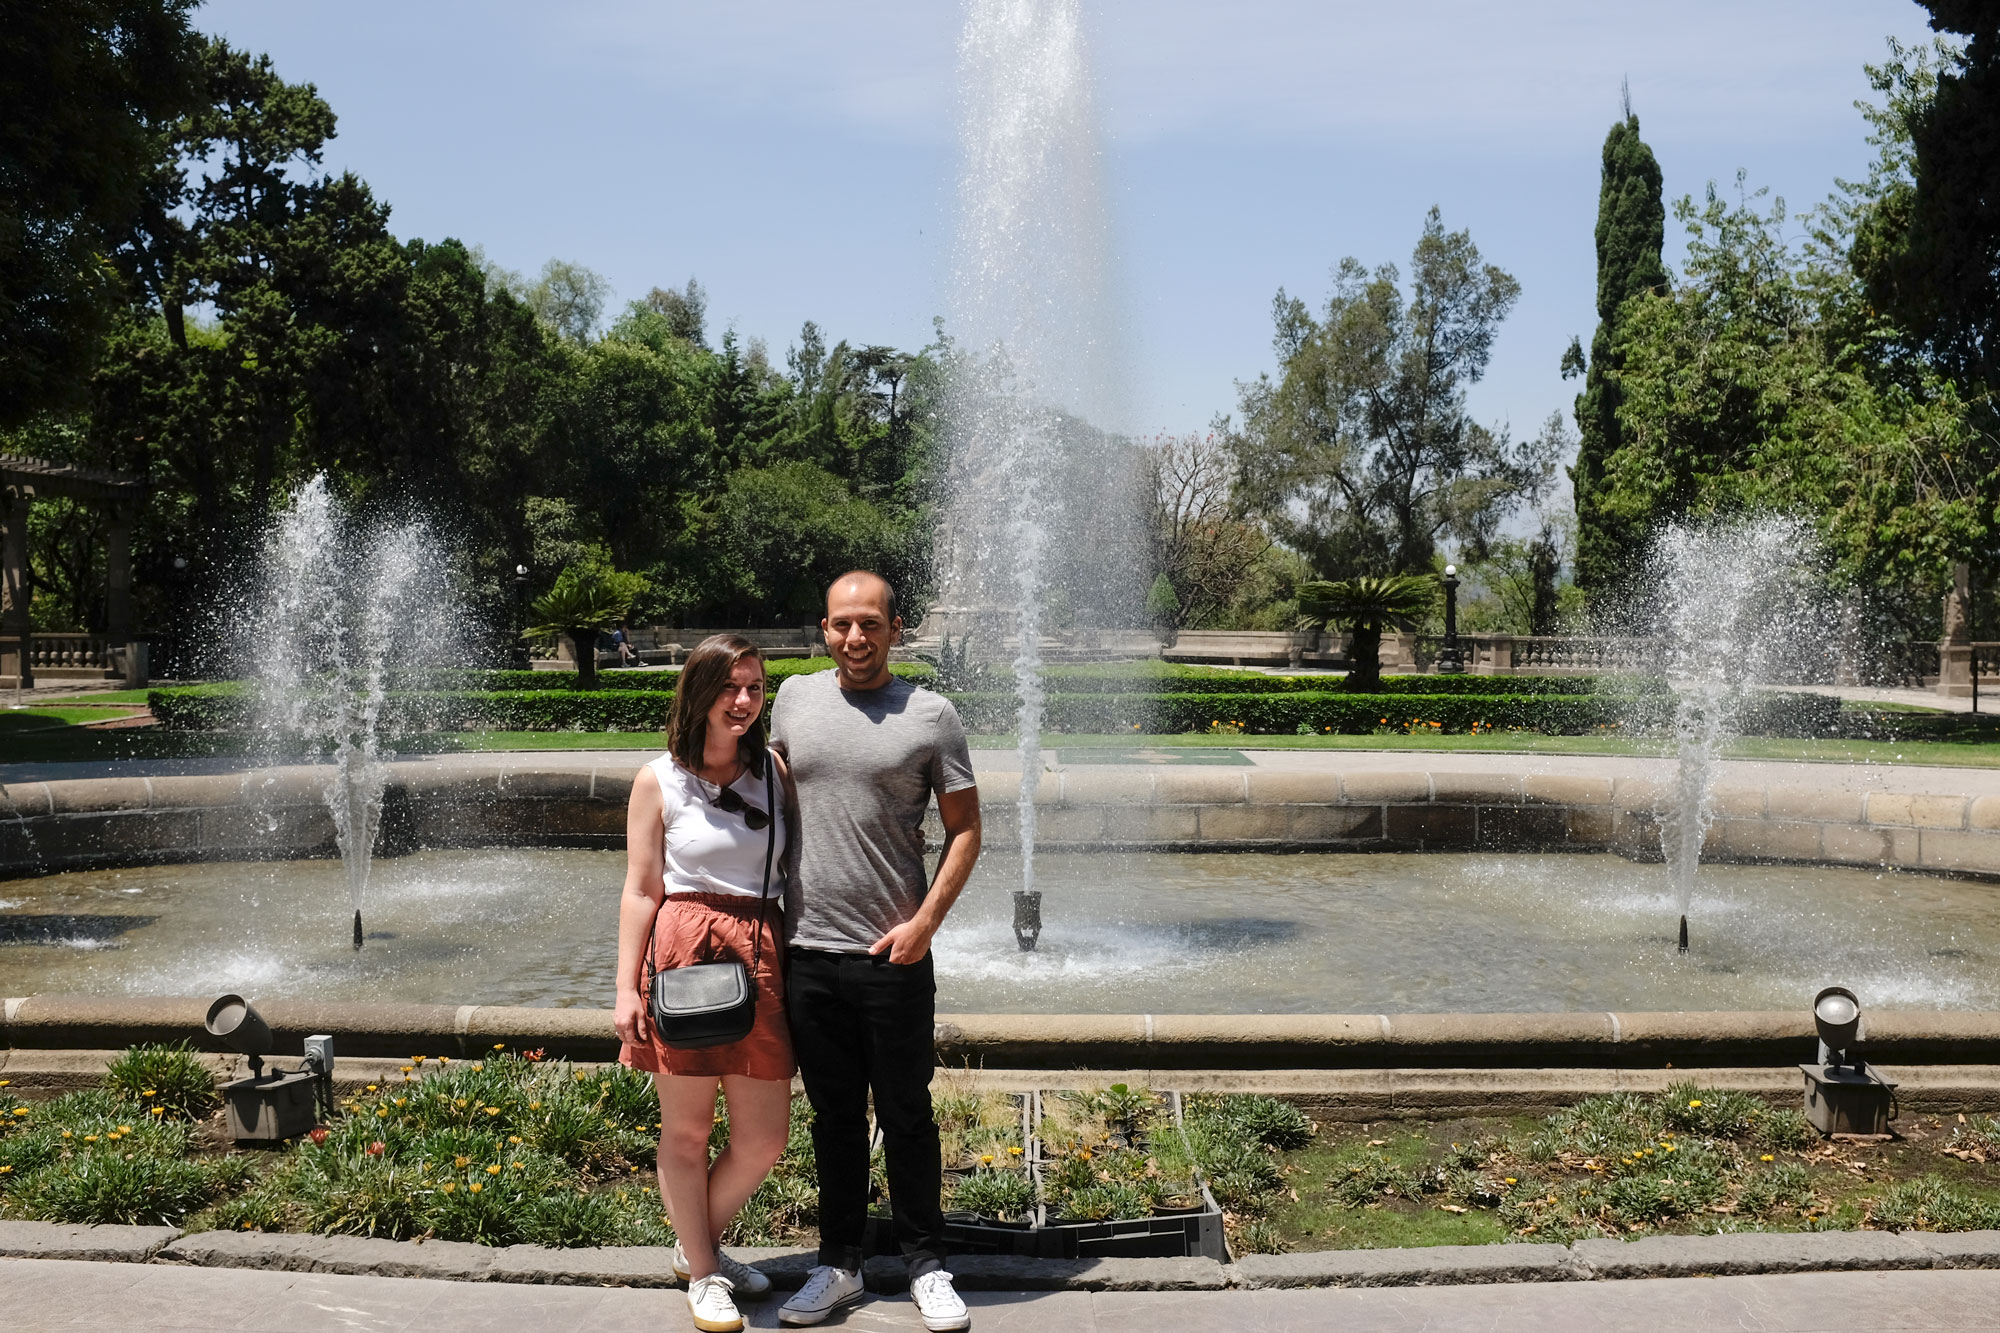 Krystal and Michael in the gardens outside of the castle in chapultepec